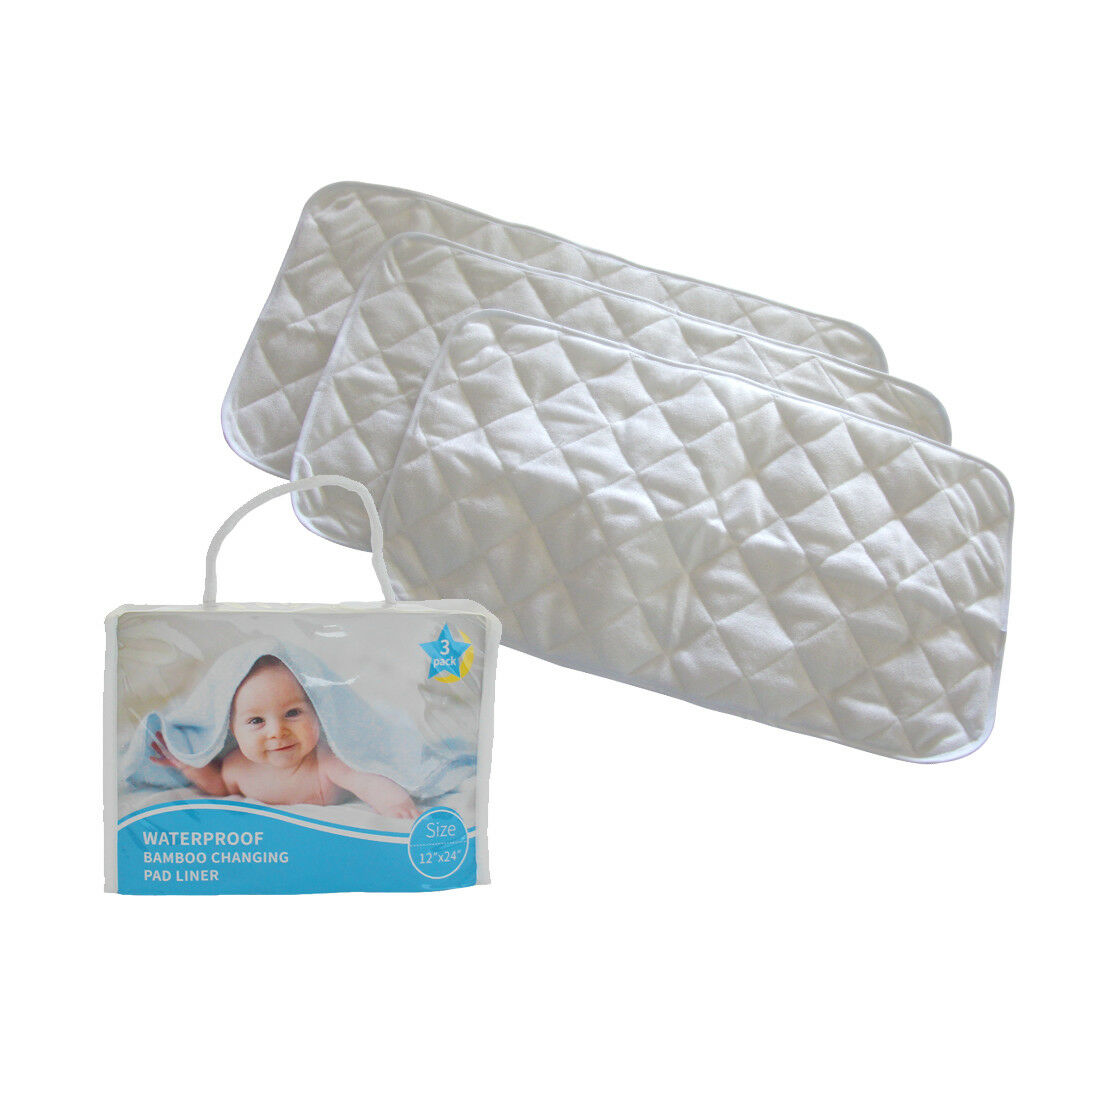 "new" Bamboo Baby Changing Pad Liners Portable And Reusable Waterproof 3 Pack